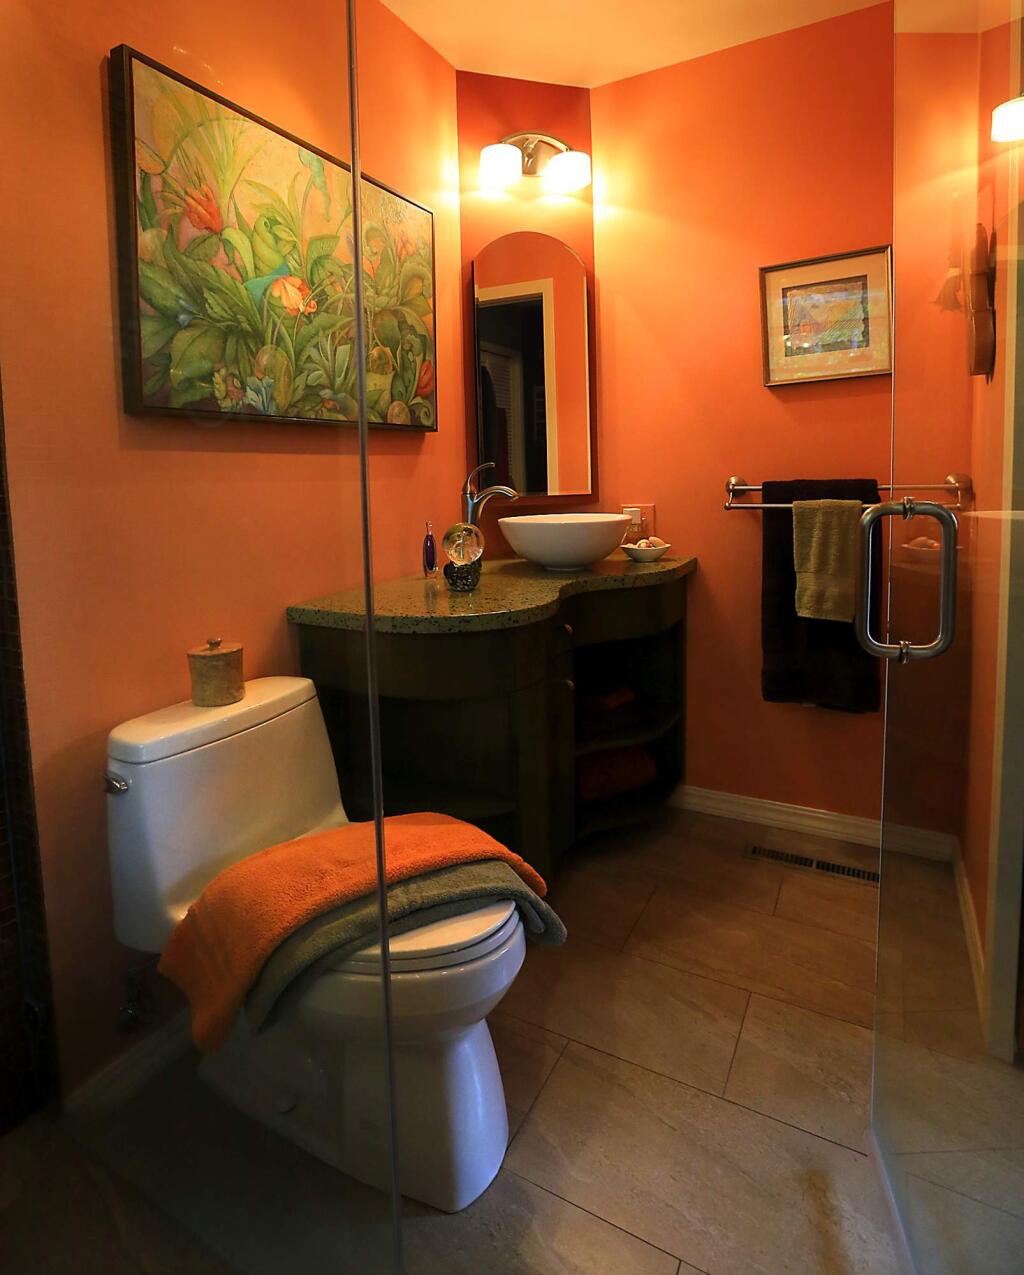 The small bathroom in the Glen Ellen home of Stephen and Christina Yingst was designed by Martha Channer and Craig Mitchell. (JOHN BURGESS / The Press Democrat)